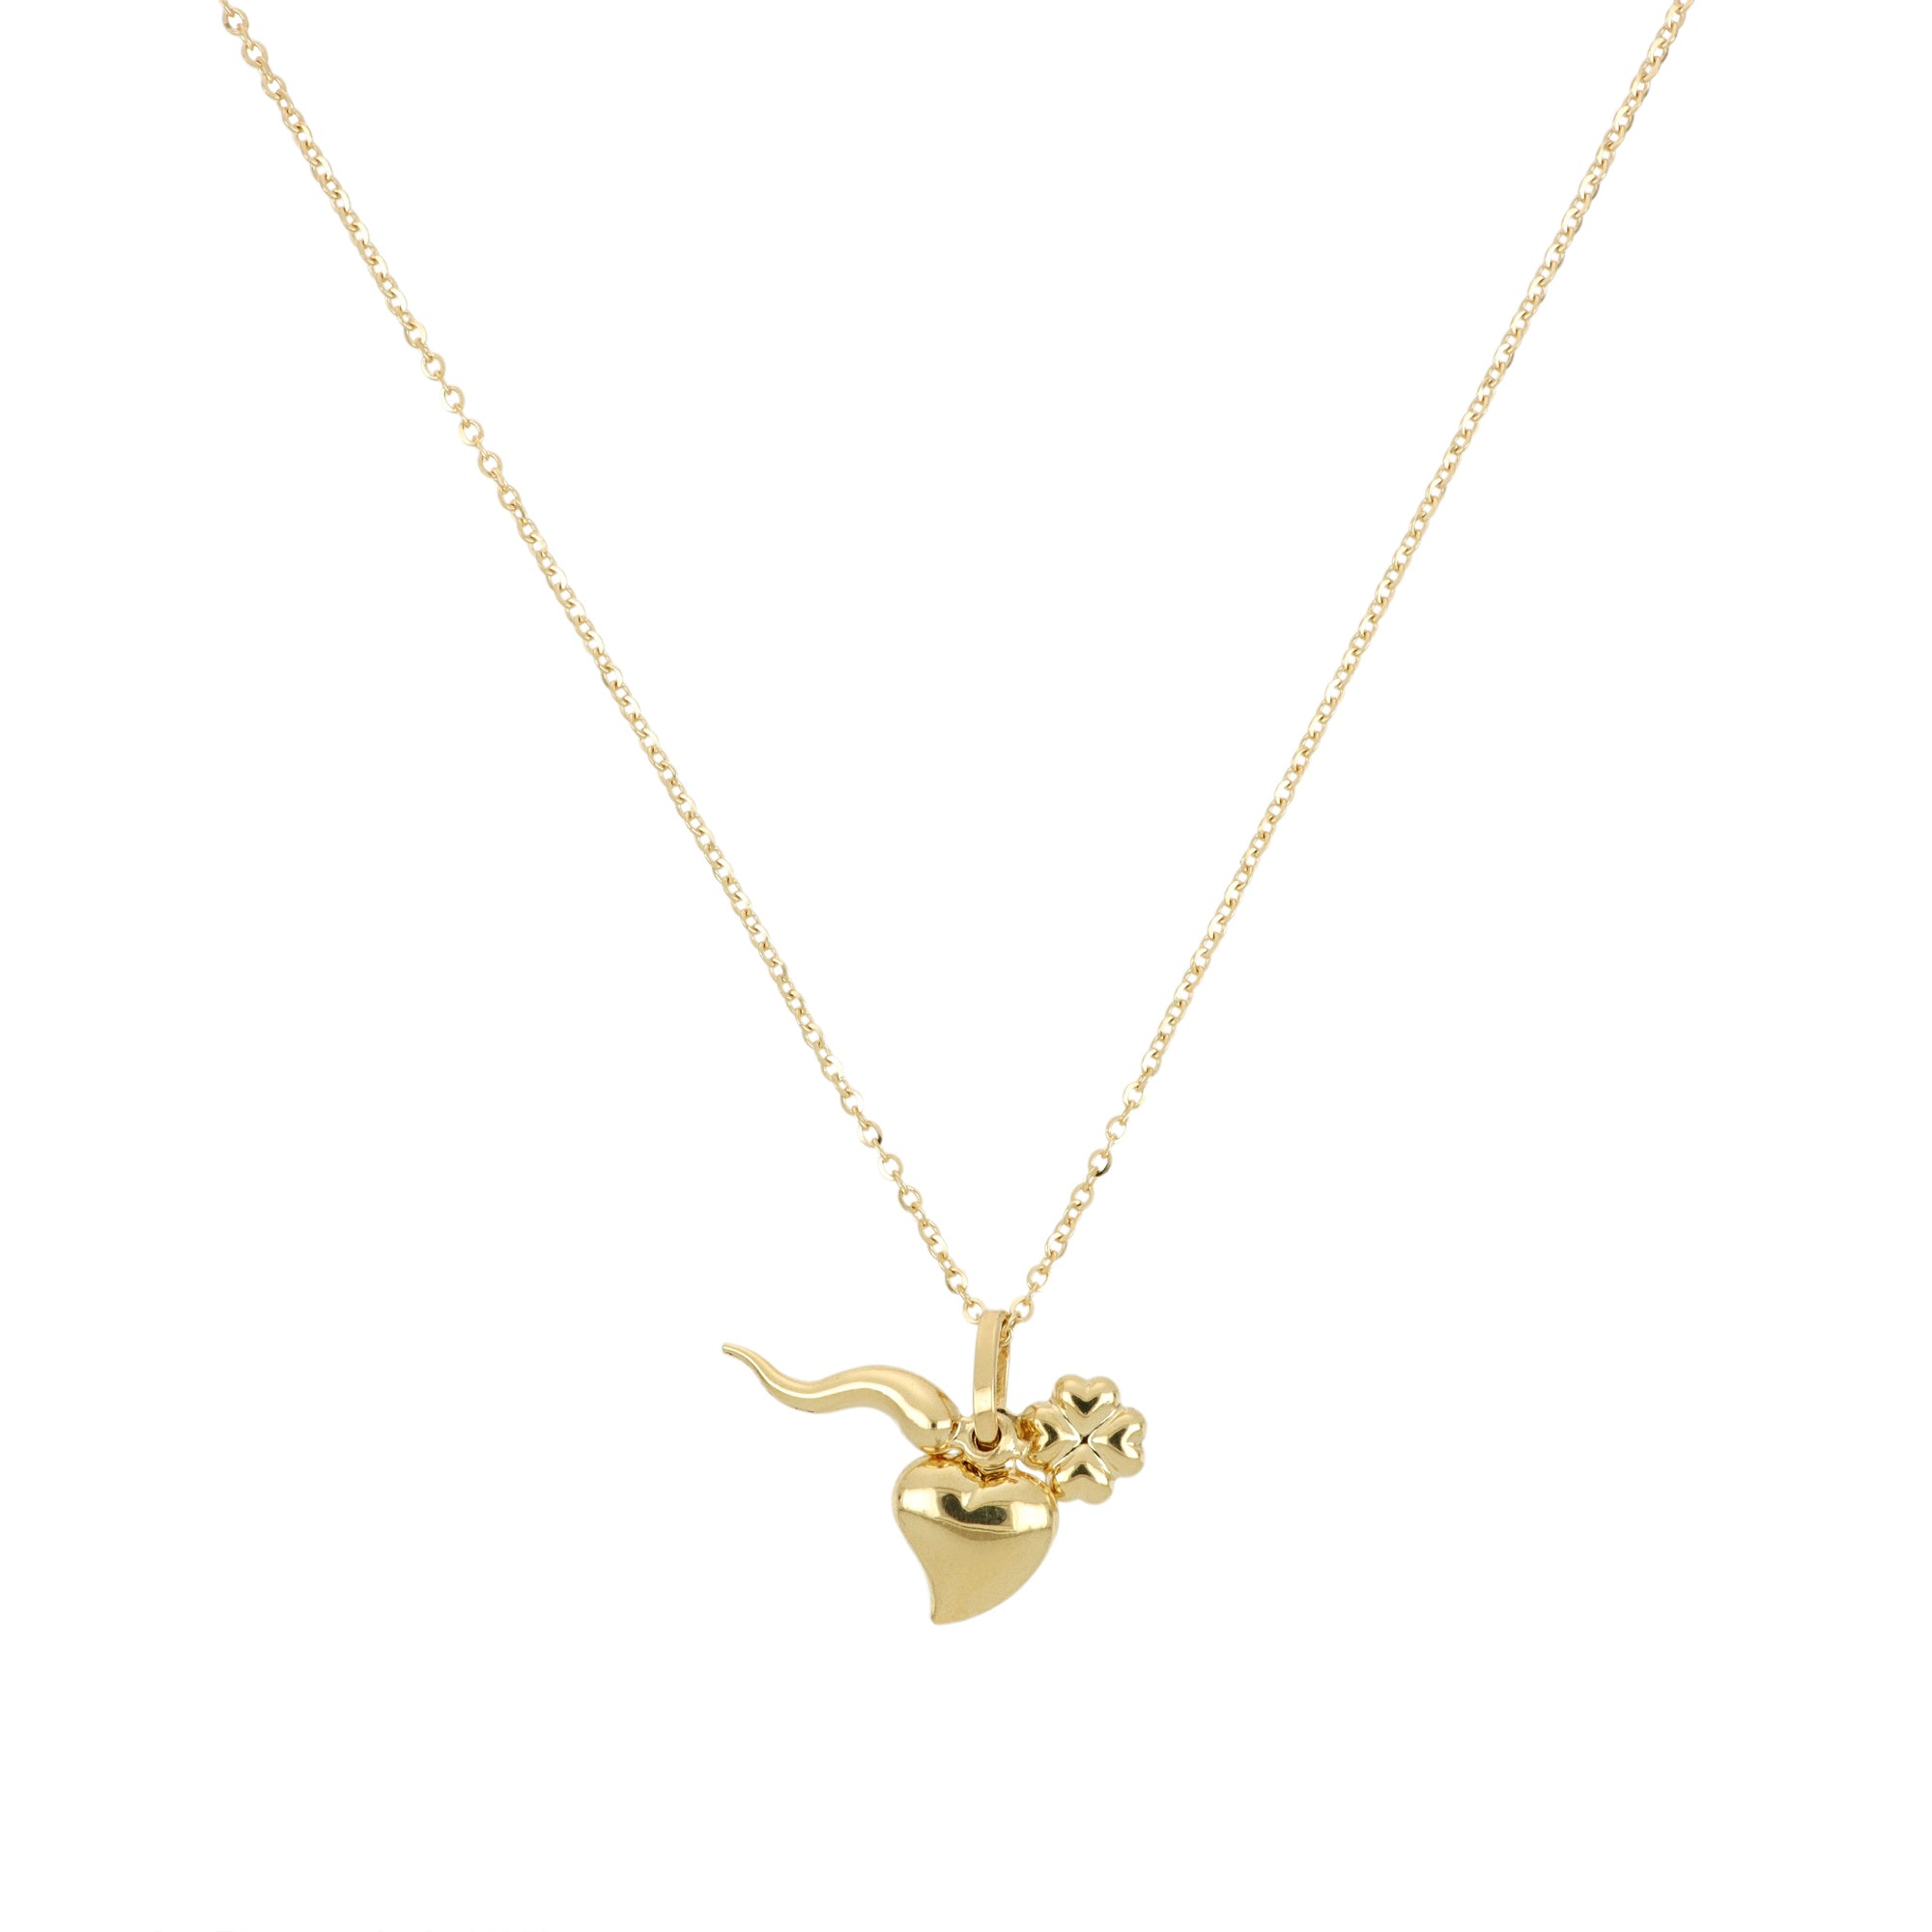 Necklace with heart, four-leaf clover and horn